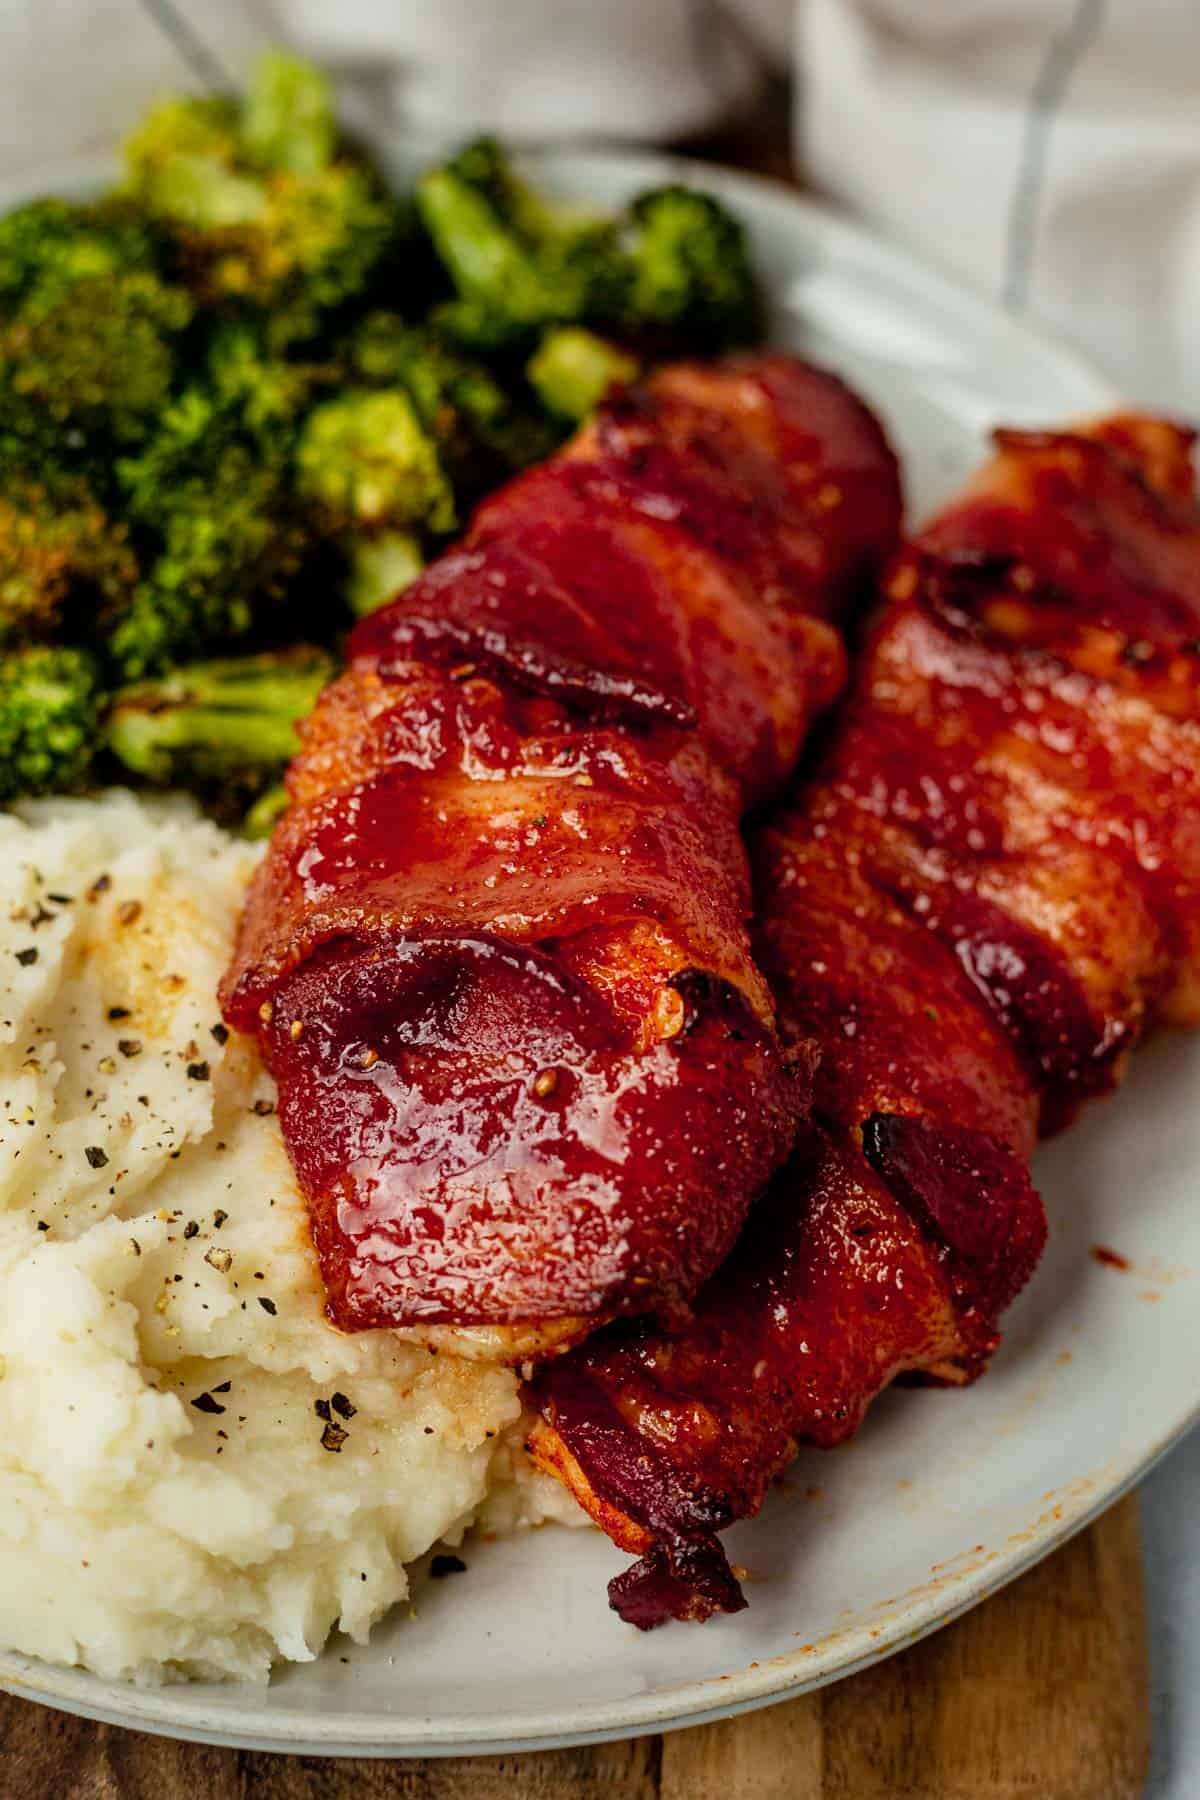 crispy bacon wrapped around chicken breast